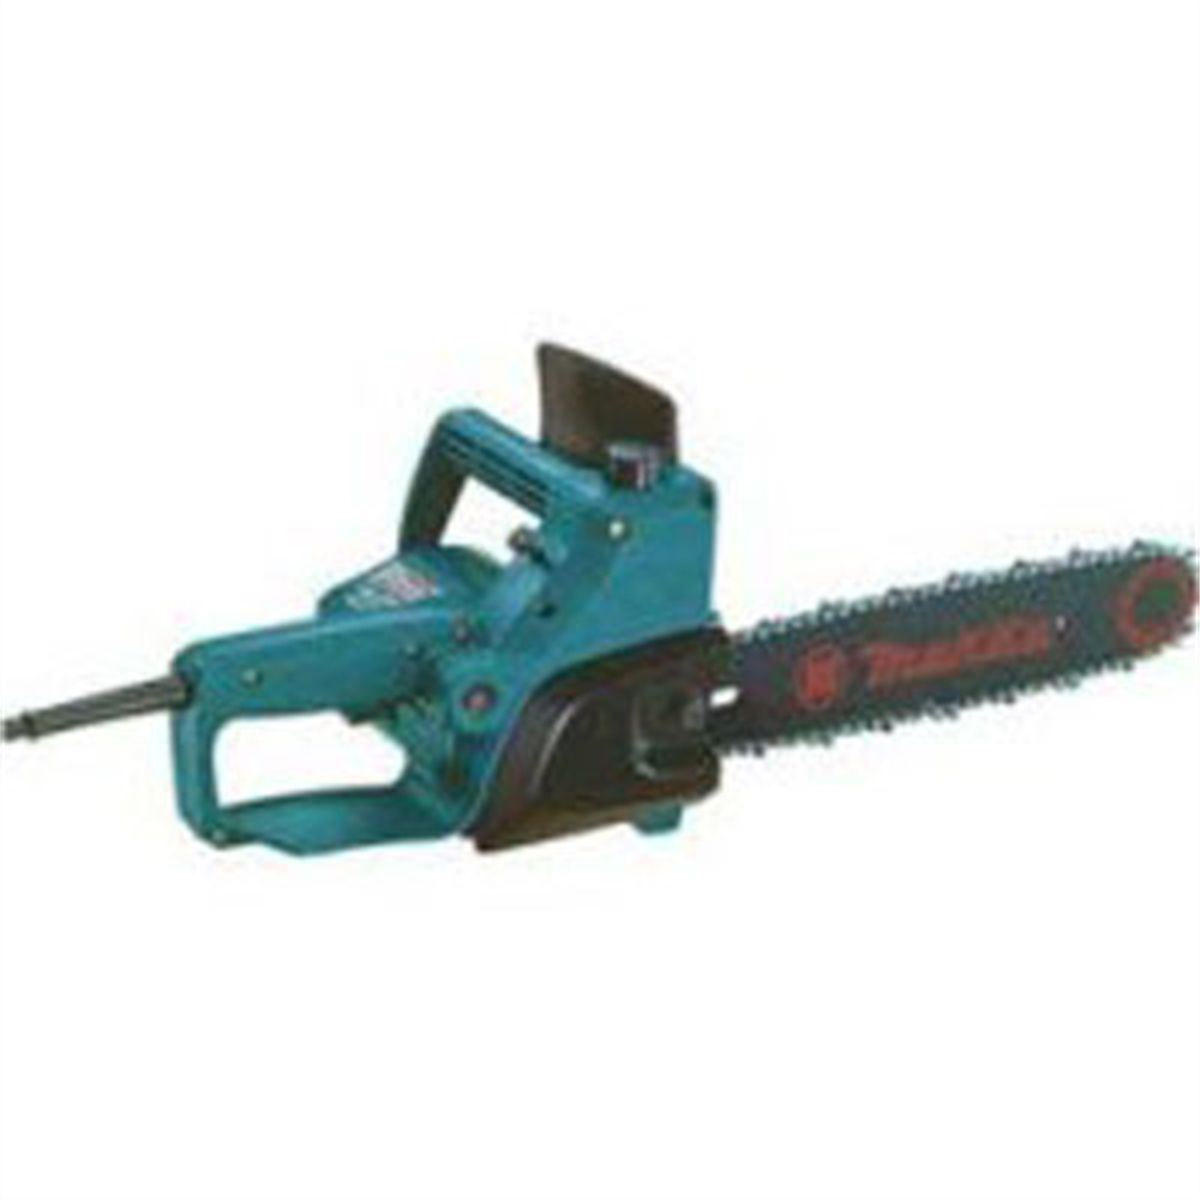 Electric Chain Saw - 12 In Chainsaw